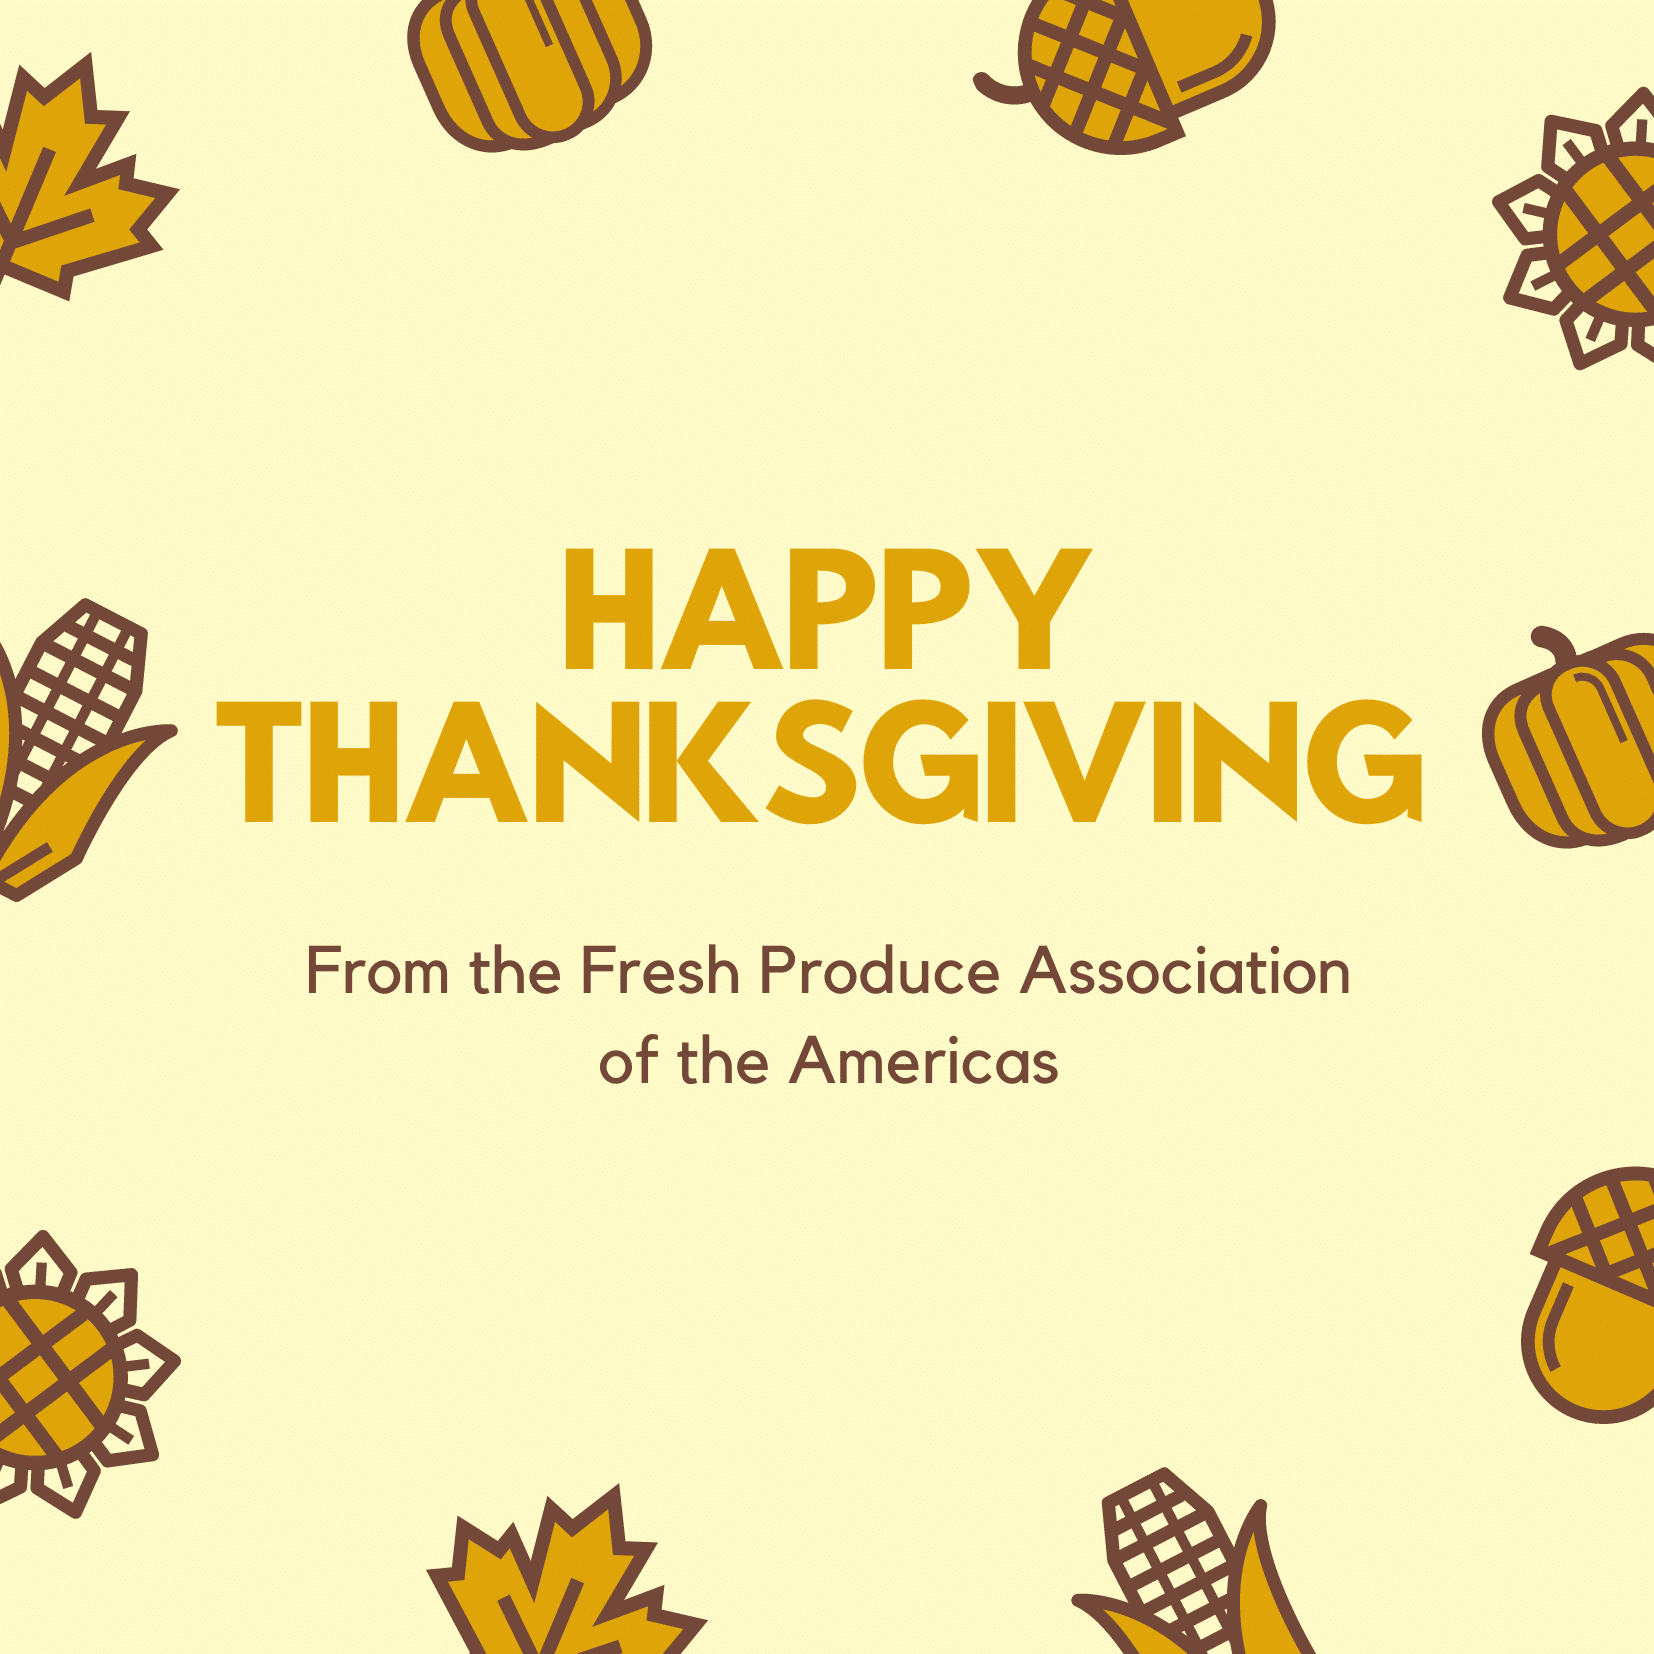 Thanksgiving Message  from the Fresh Produce Association of the Americas